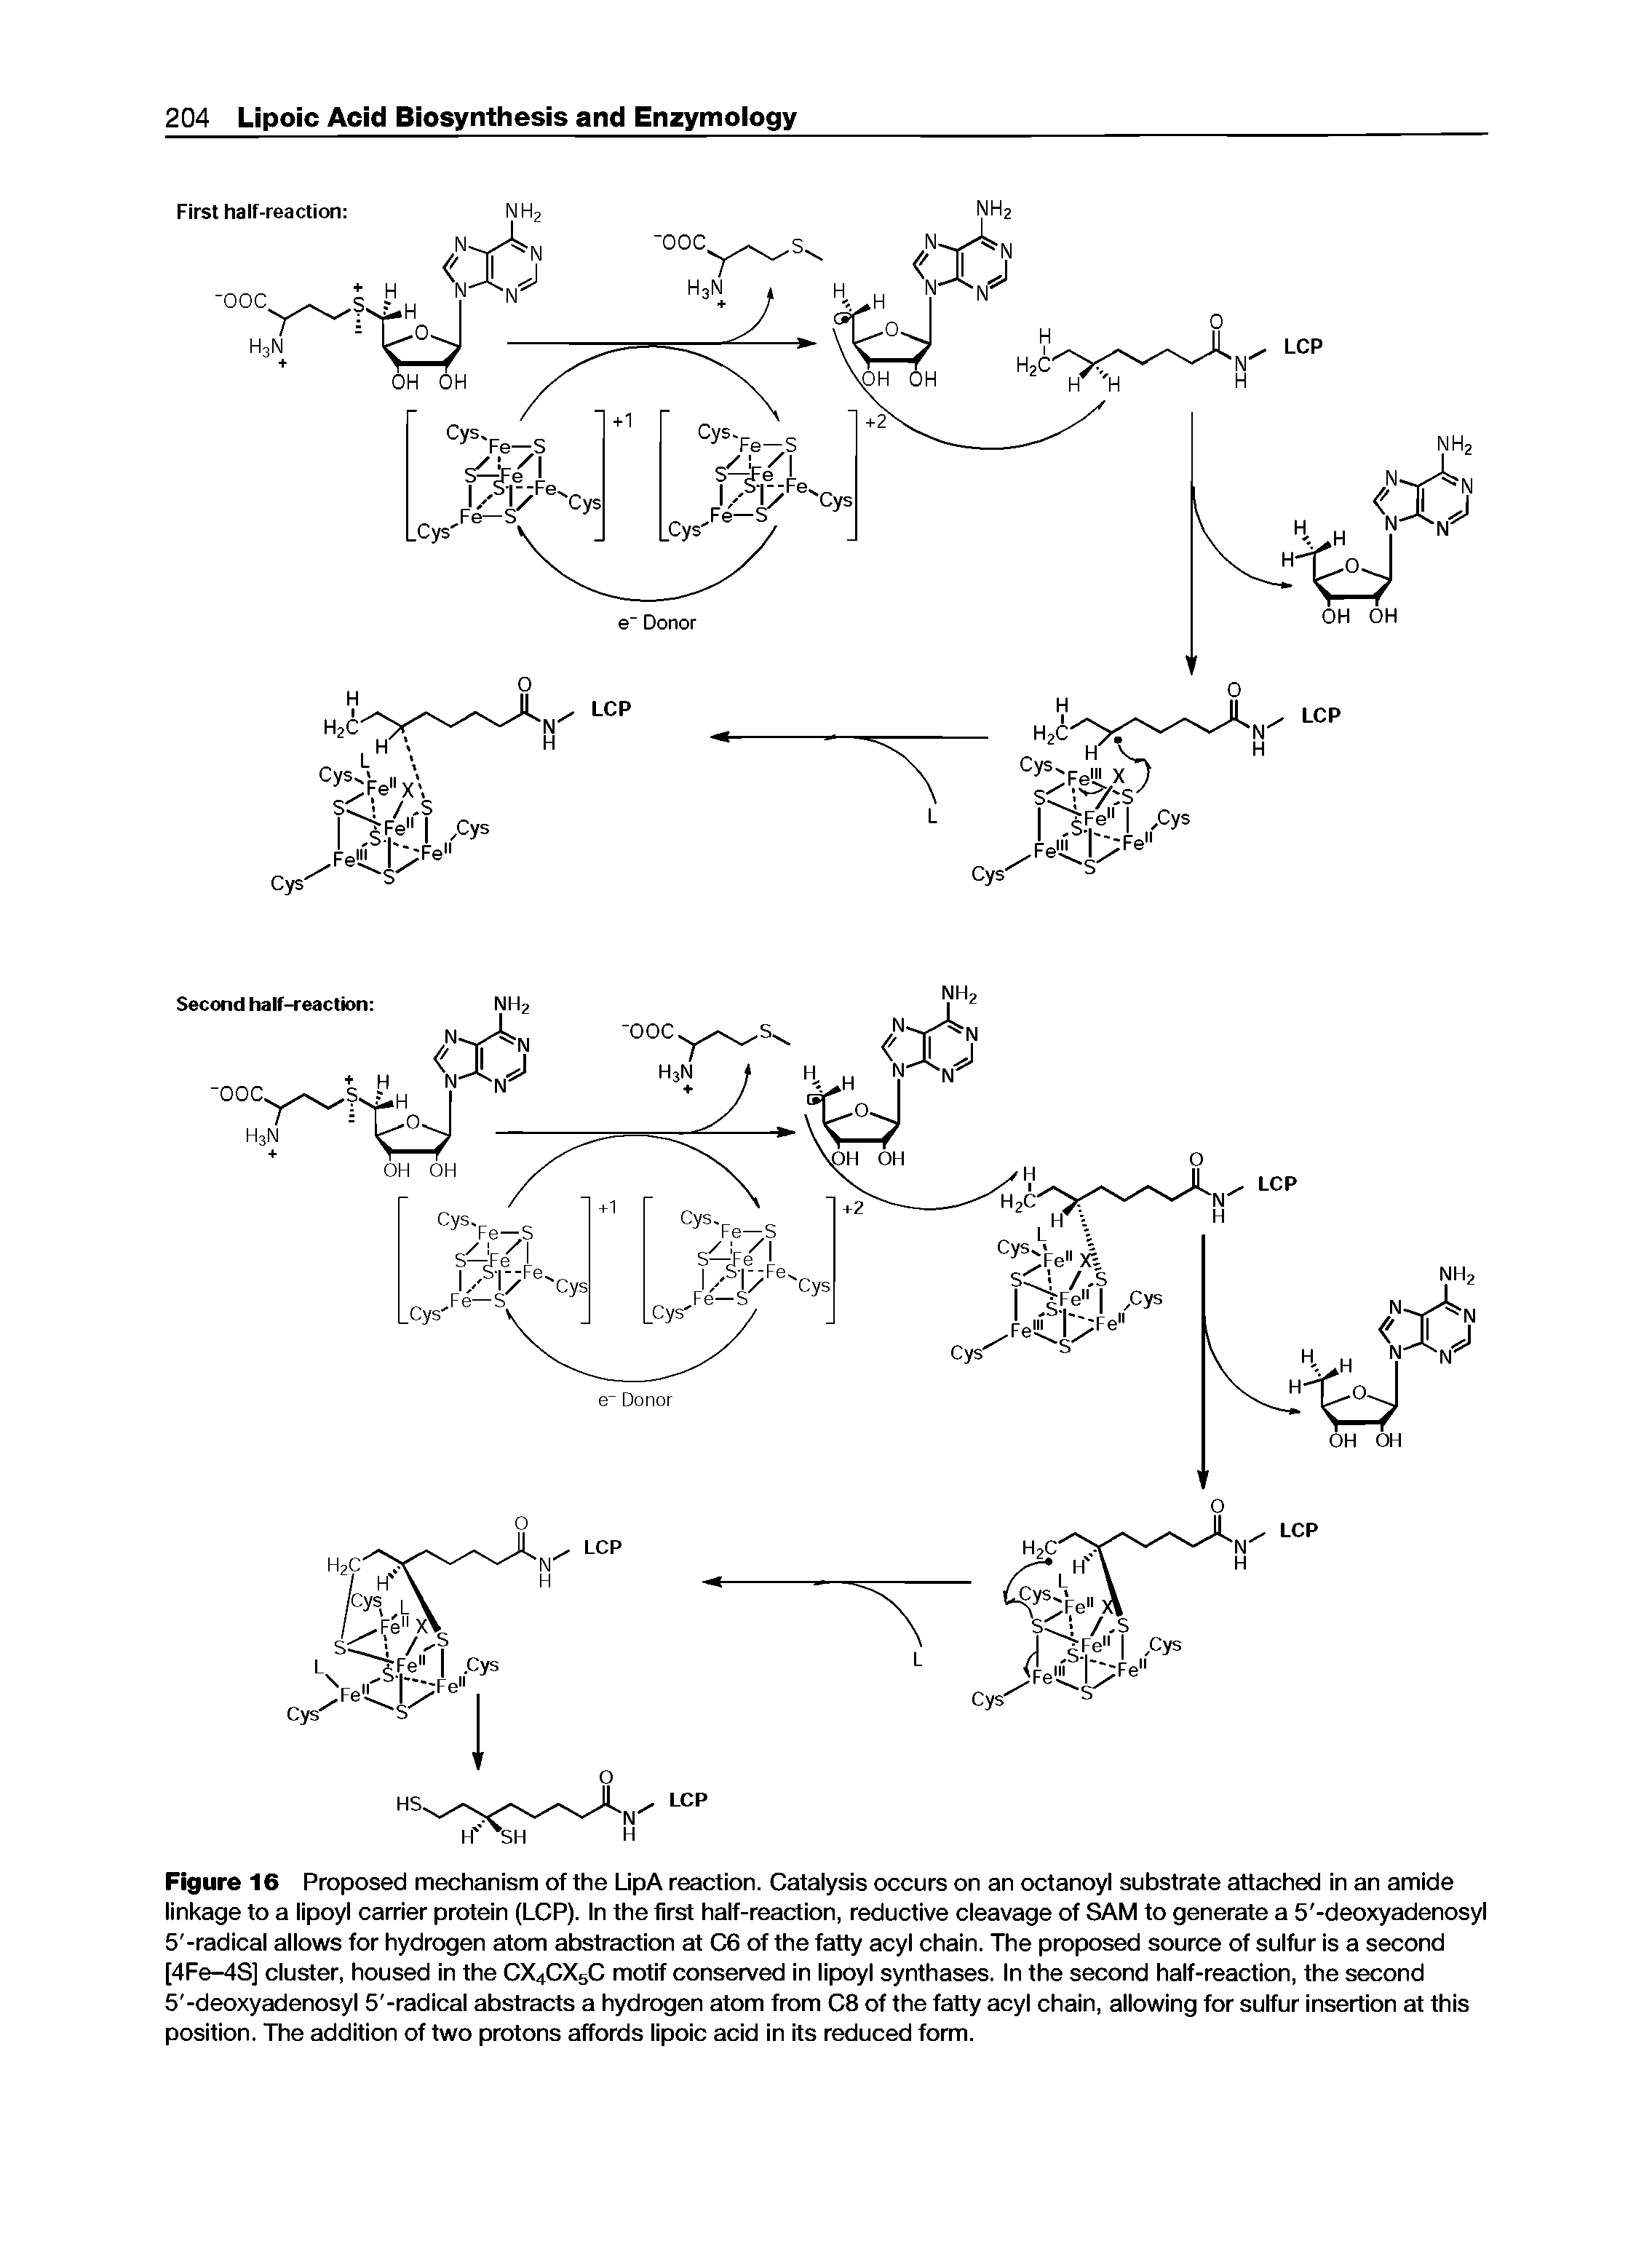 Figure 16 Proposed mechanism of the LipA reaction. Cataiysis occurs on an octanoyi substrate attached in an amide linkage to a lipoyl carrier protein (LCP). In the first half-reaction, reductive cleavage of SAM to generate a 5 -deoxyadenosyl 5 -radical allows for hydrogen atom abstraction at C6 of the fatty acyl chain. The proposed source of sulfur is a second [4Fe-4S] cluster, housed in the CX4CX5C motif conserved in lipoyl synthases. In the second half-reaction, the second 5 -deoxyadenosyl 5 -radical abstracts a hydrogen atom from C8 of the fatty acyl chain, allowing for sulfur insertion at this position. The addition of two protons affords lipoic acid in its reduced form.